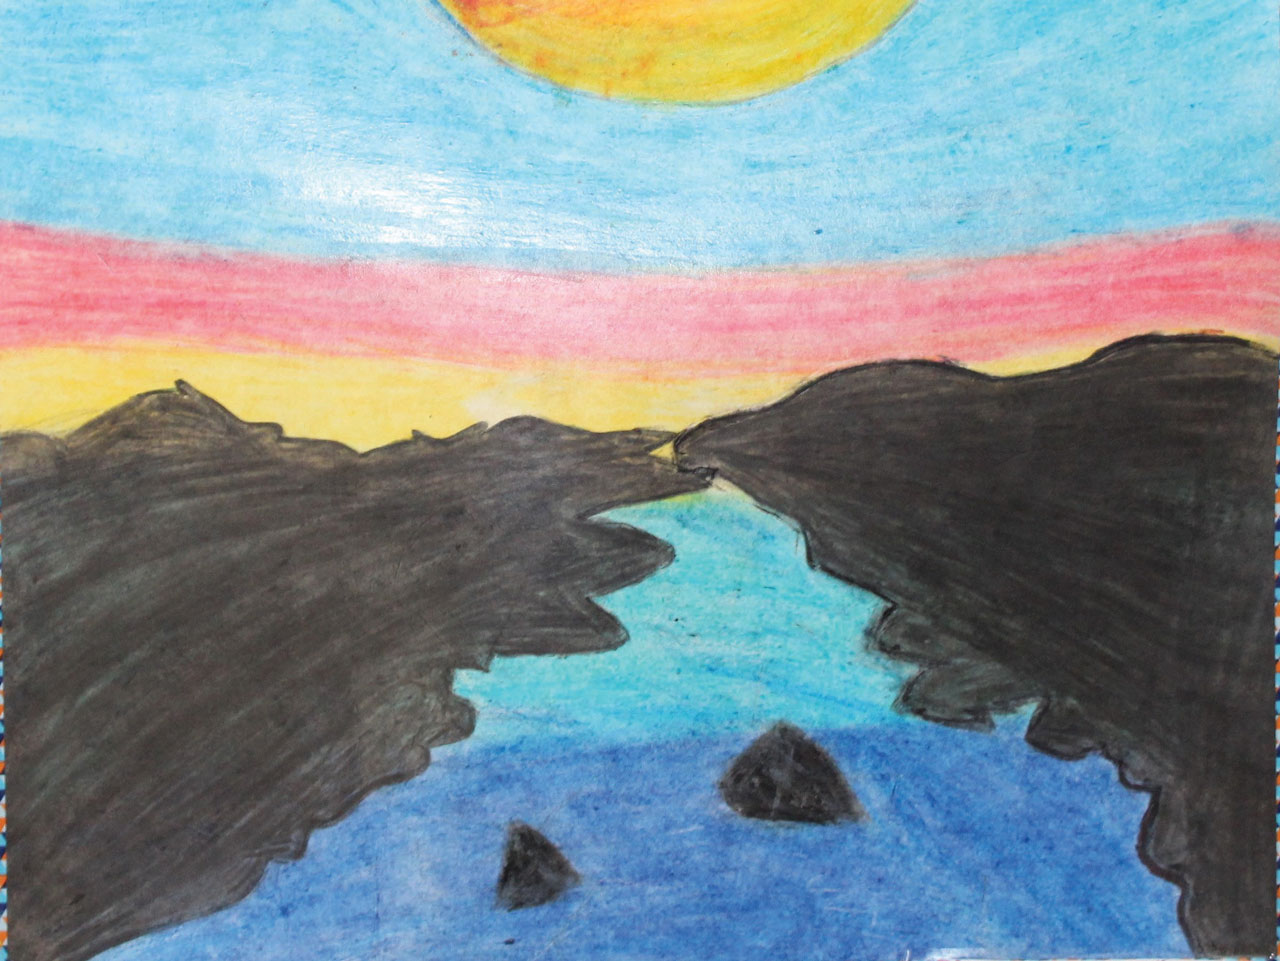 Oil-Pastel-Drawing-of-Sunset-Nature-and-River-Scene